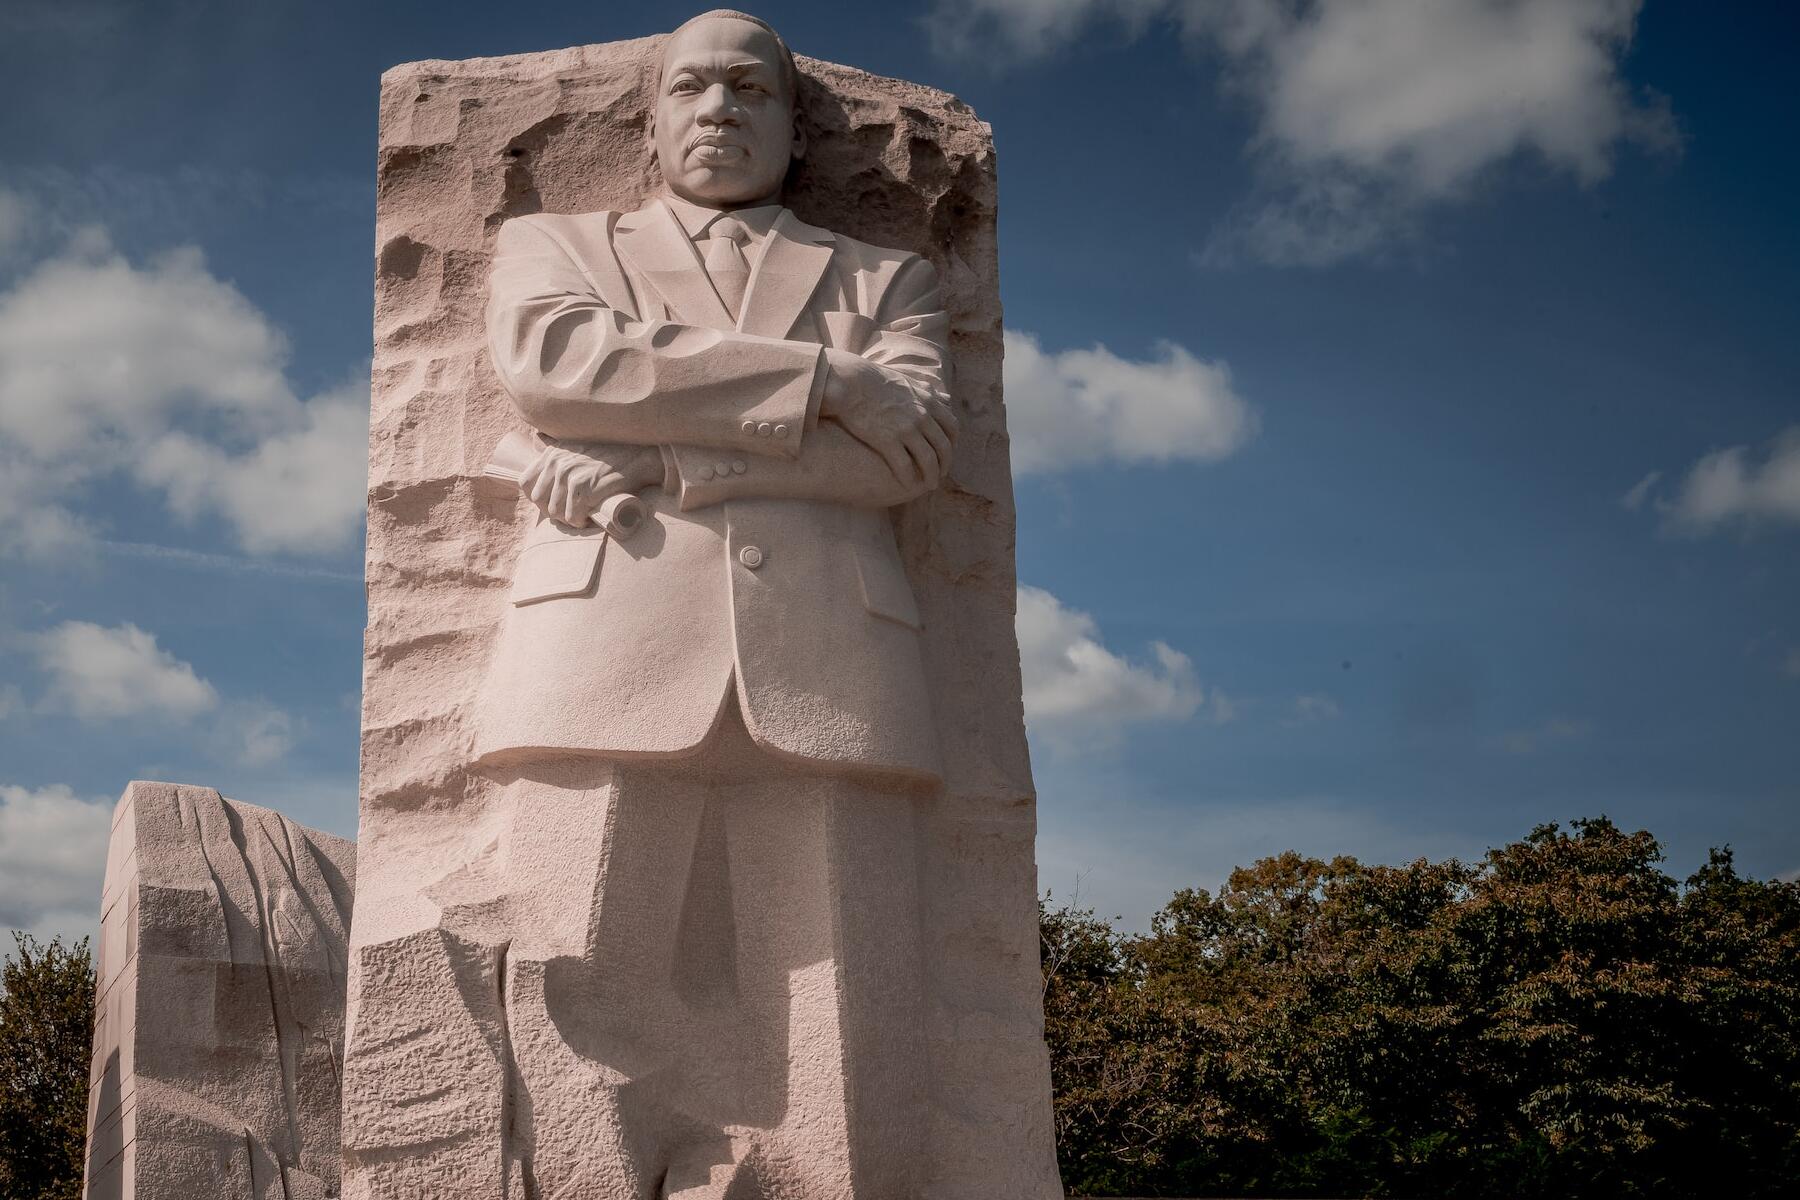 <a href='https://www.fodors.com/world/north-america/usa/washington-dc/experiences/news/photos/places-to-find-black-history-in-washington-dc#'>From &quot;11 Places to Connect With Washington, D.C.’s Rich Black History&quot;</a>